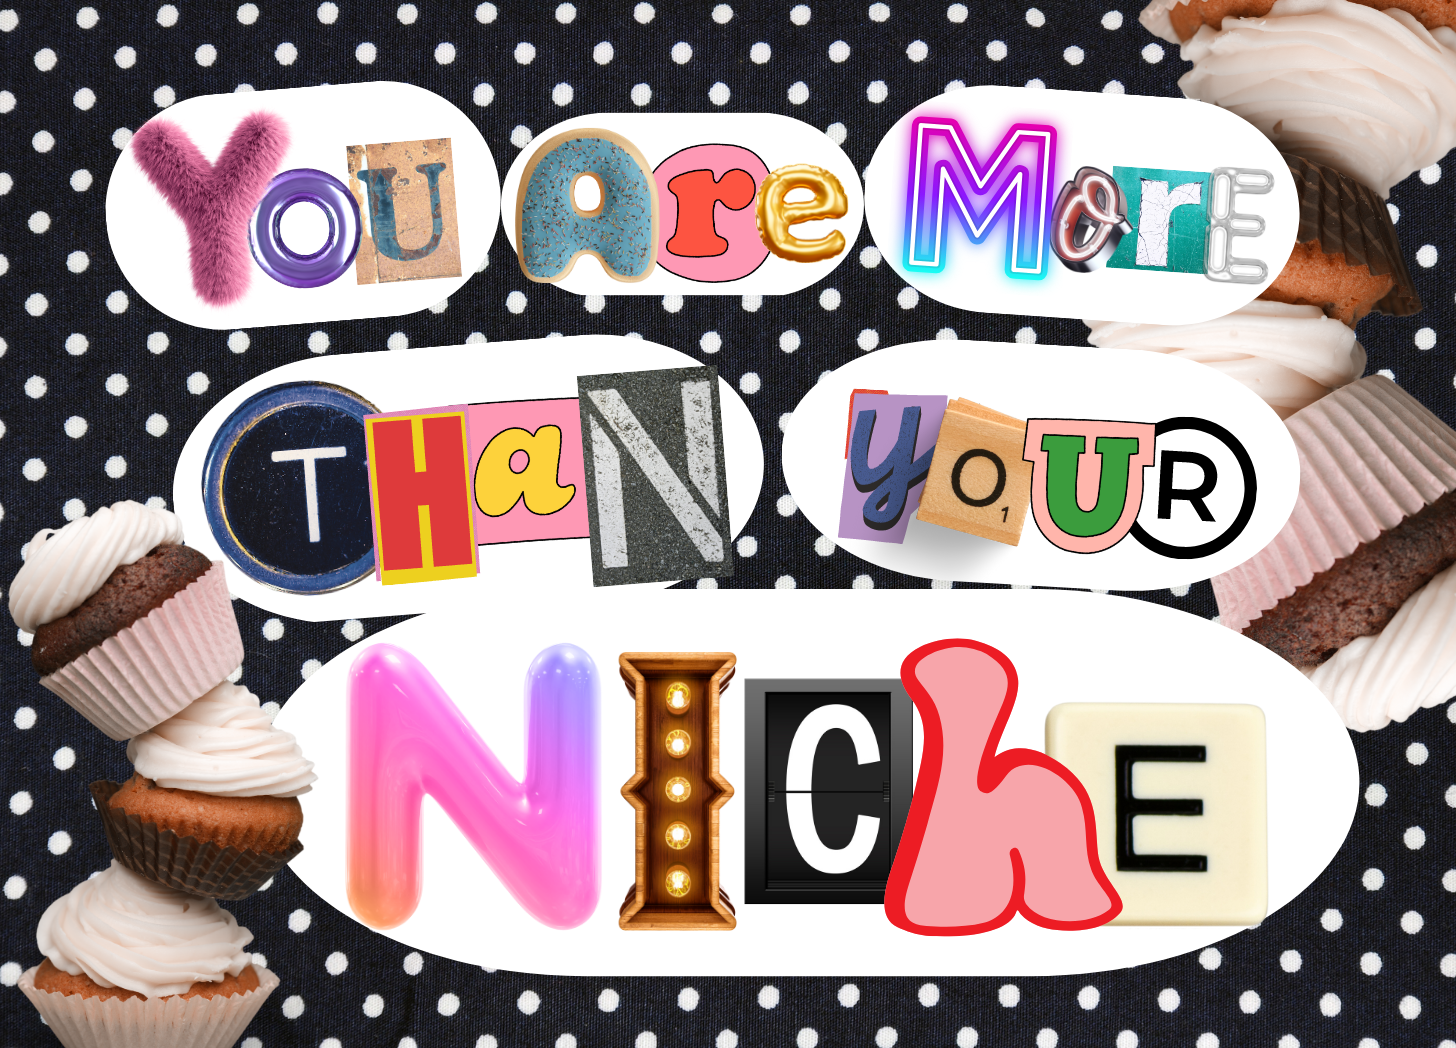 A black background with white polka dots and random letters that spell out "You are more than your niche" there are two stacks of vanilla cupcakes in the corners.